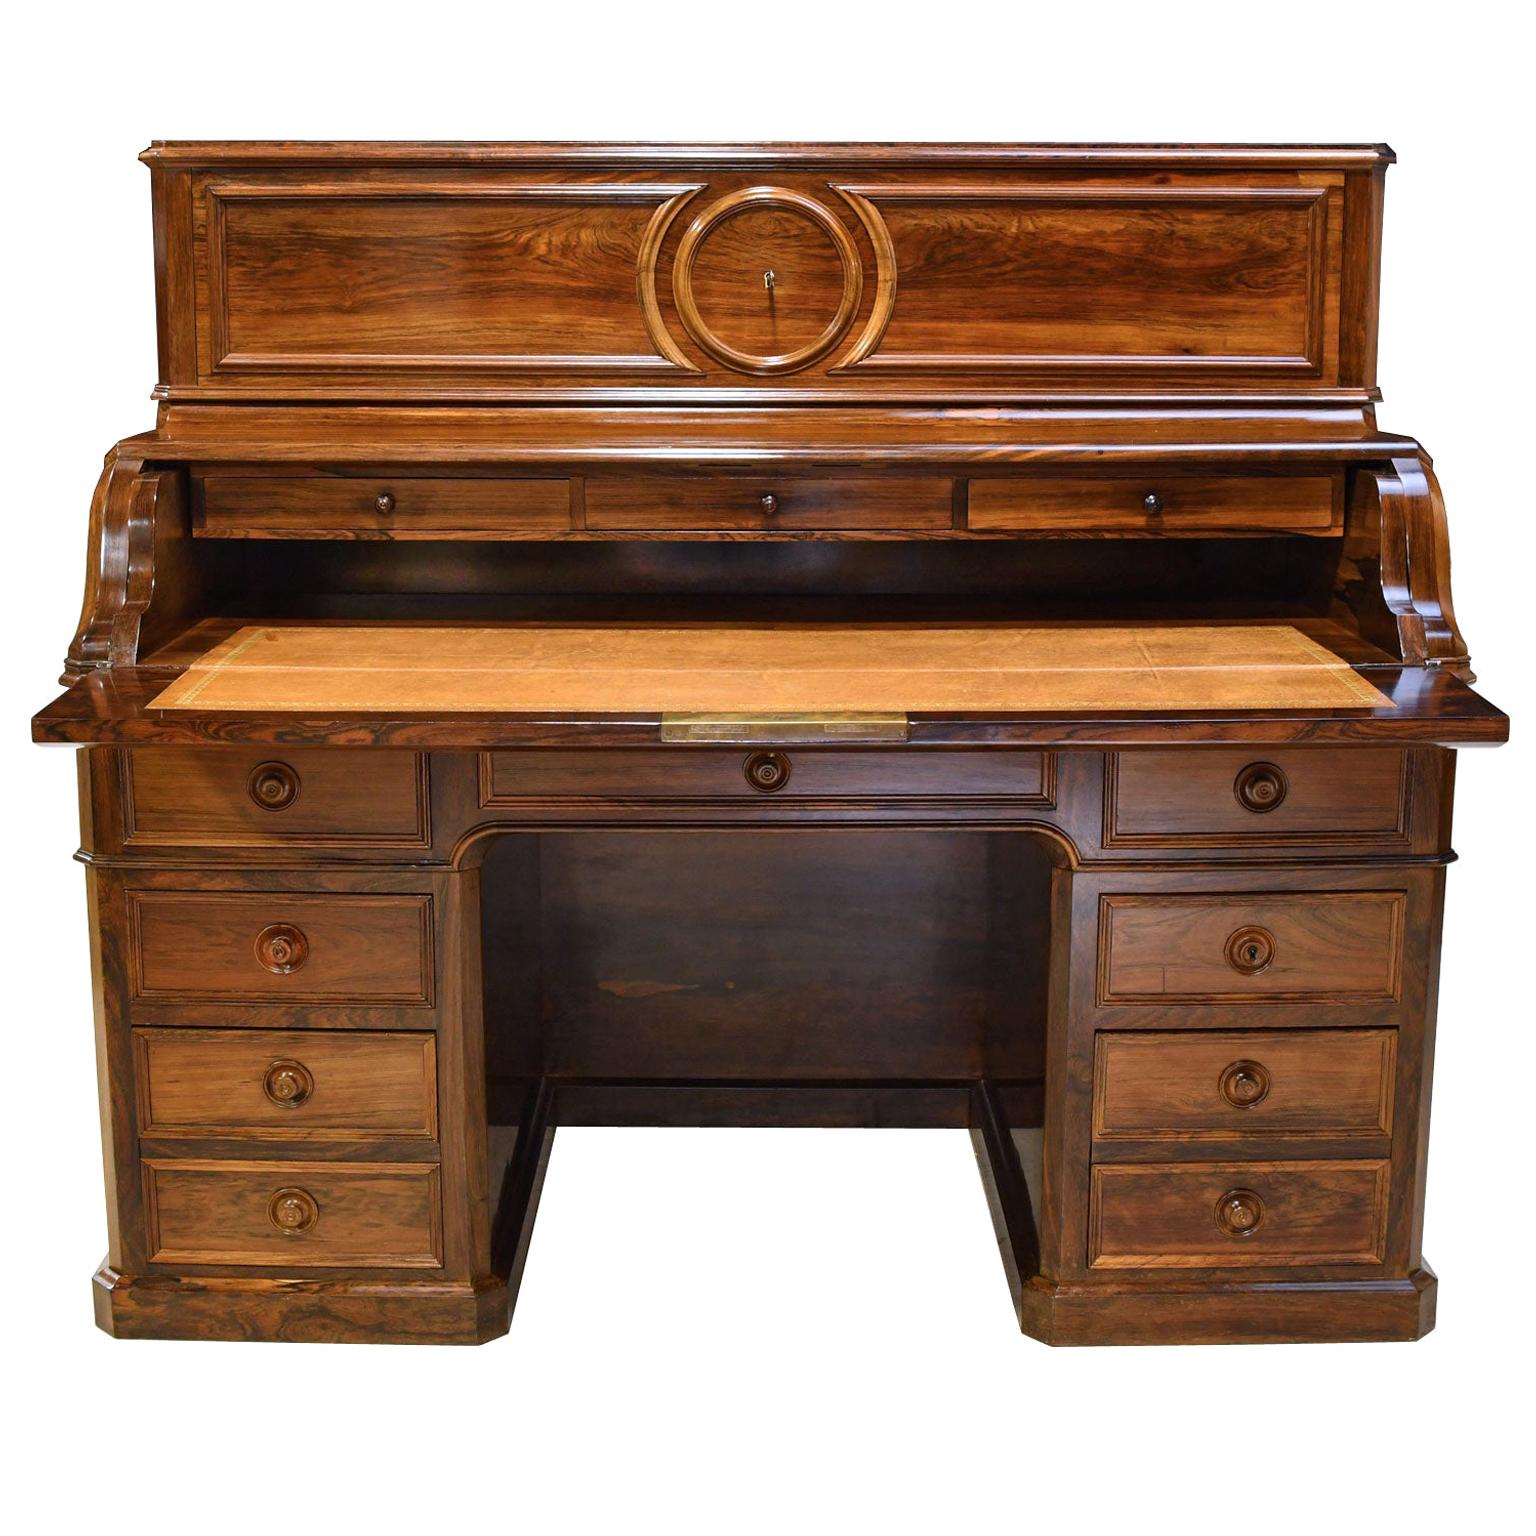 French Napoleon III Rosewood Pedestal Desk with Pull Out Secretary, circa 1865